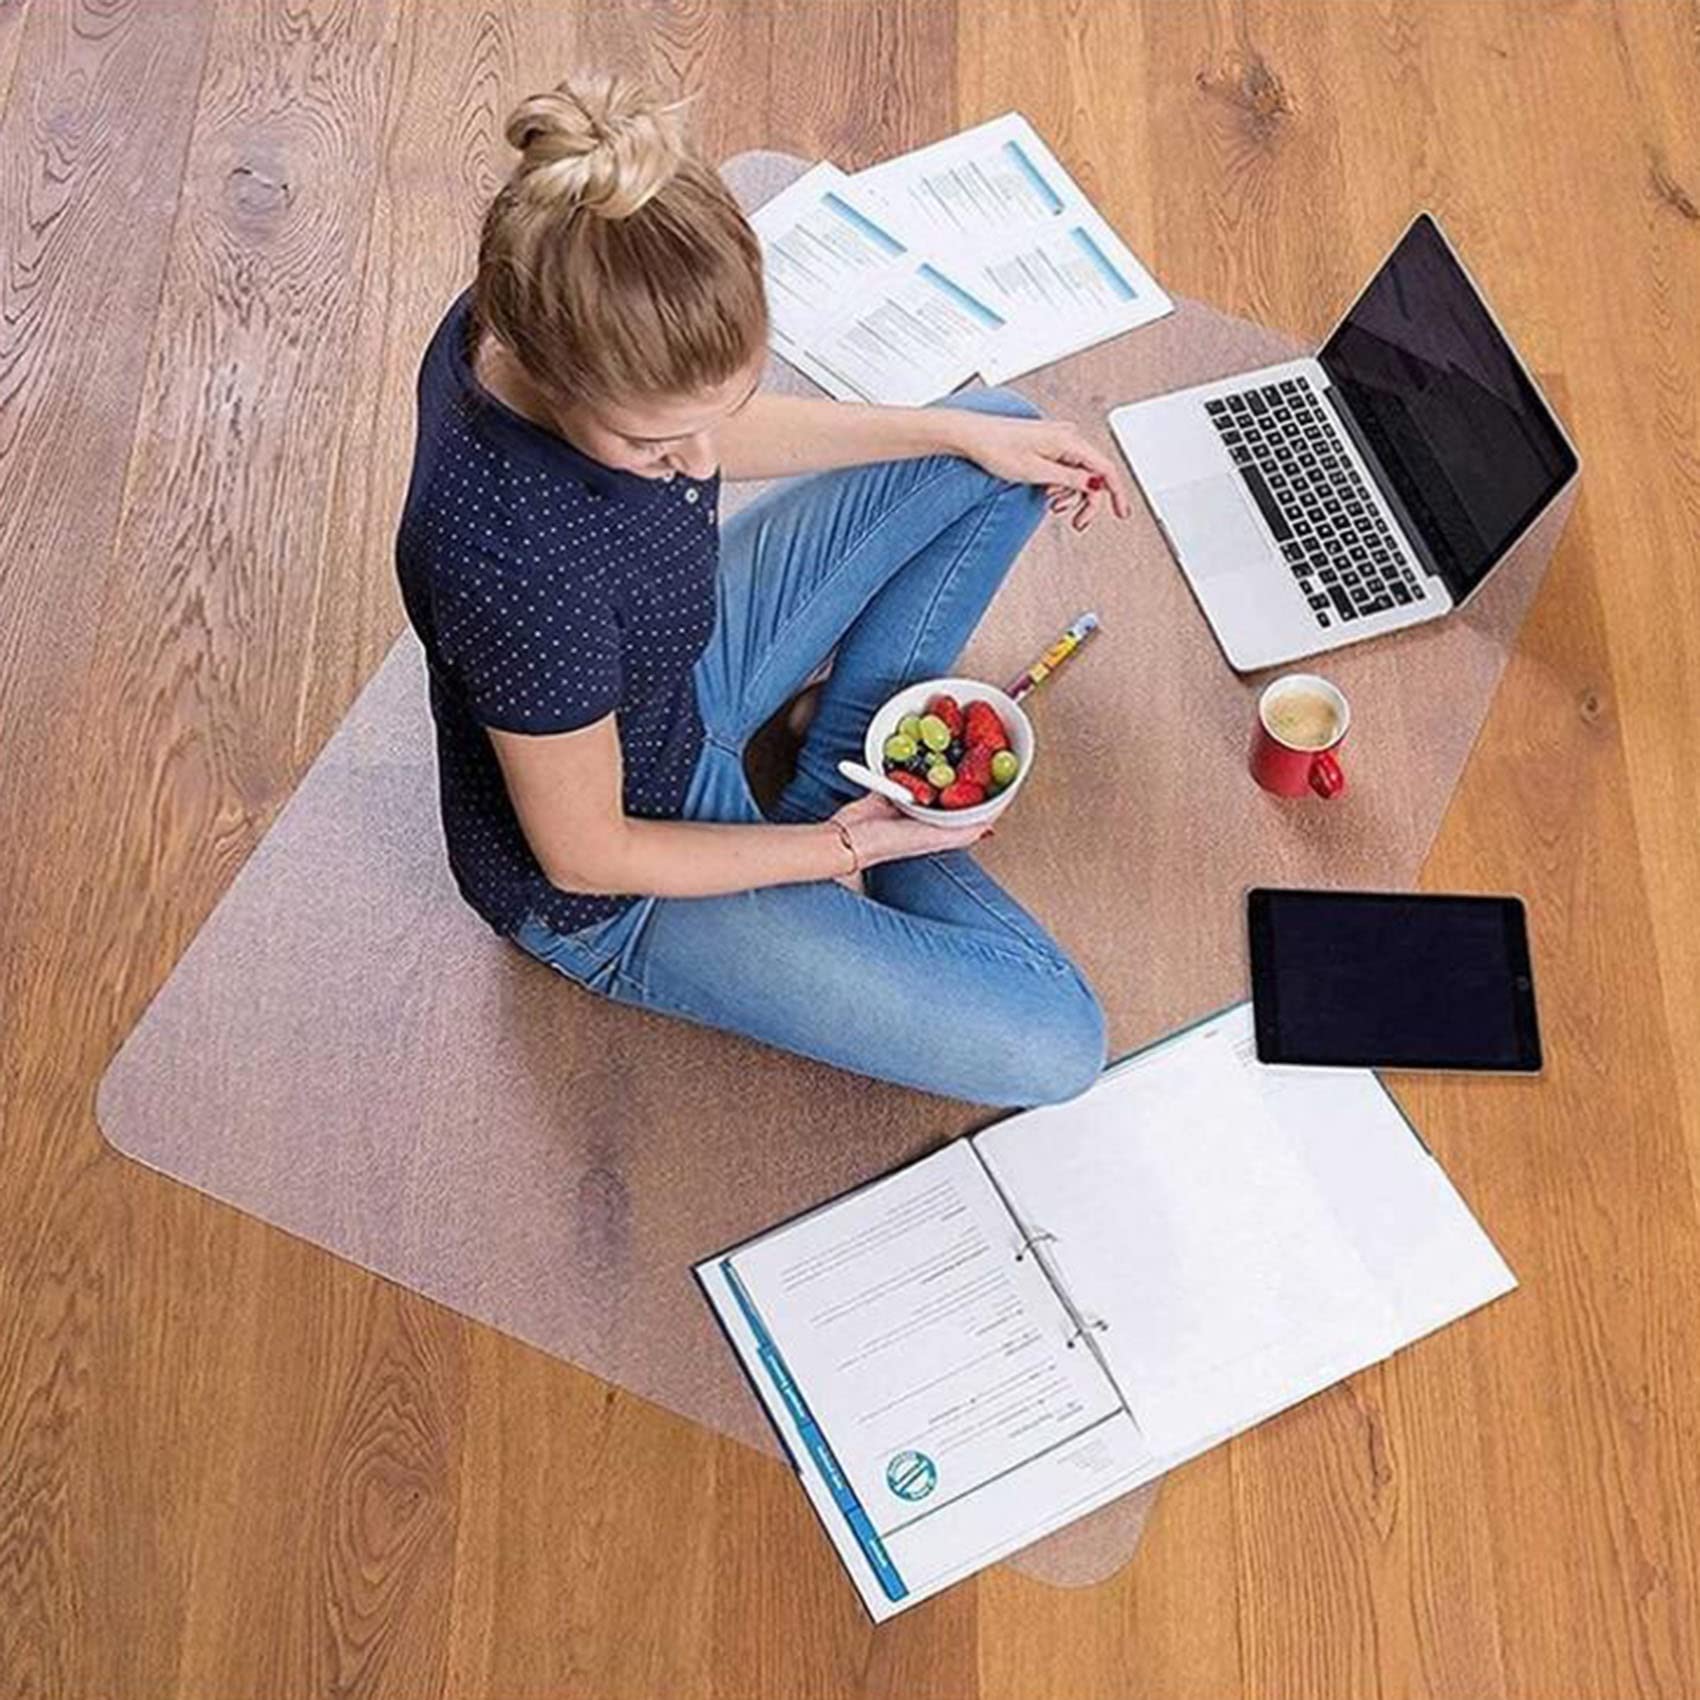 Clear PVC Desk Chair Mat Clear Floor Protector Carpet for Hard Surface Floors, Non Slip Easy Clean Area Rug Pad,Thick 1.5mm,60/80/90/100/120cm wide,Area Rugs Hallway PVC Transparent Runner Mat for Off